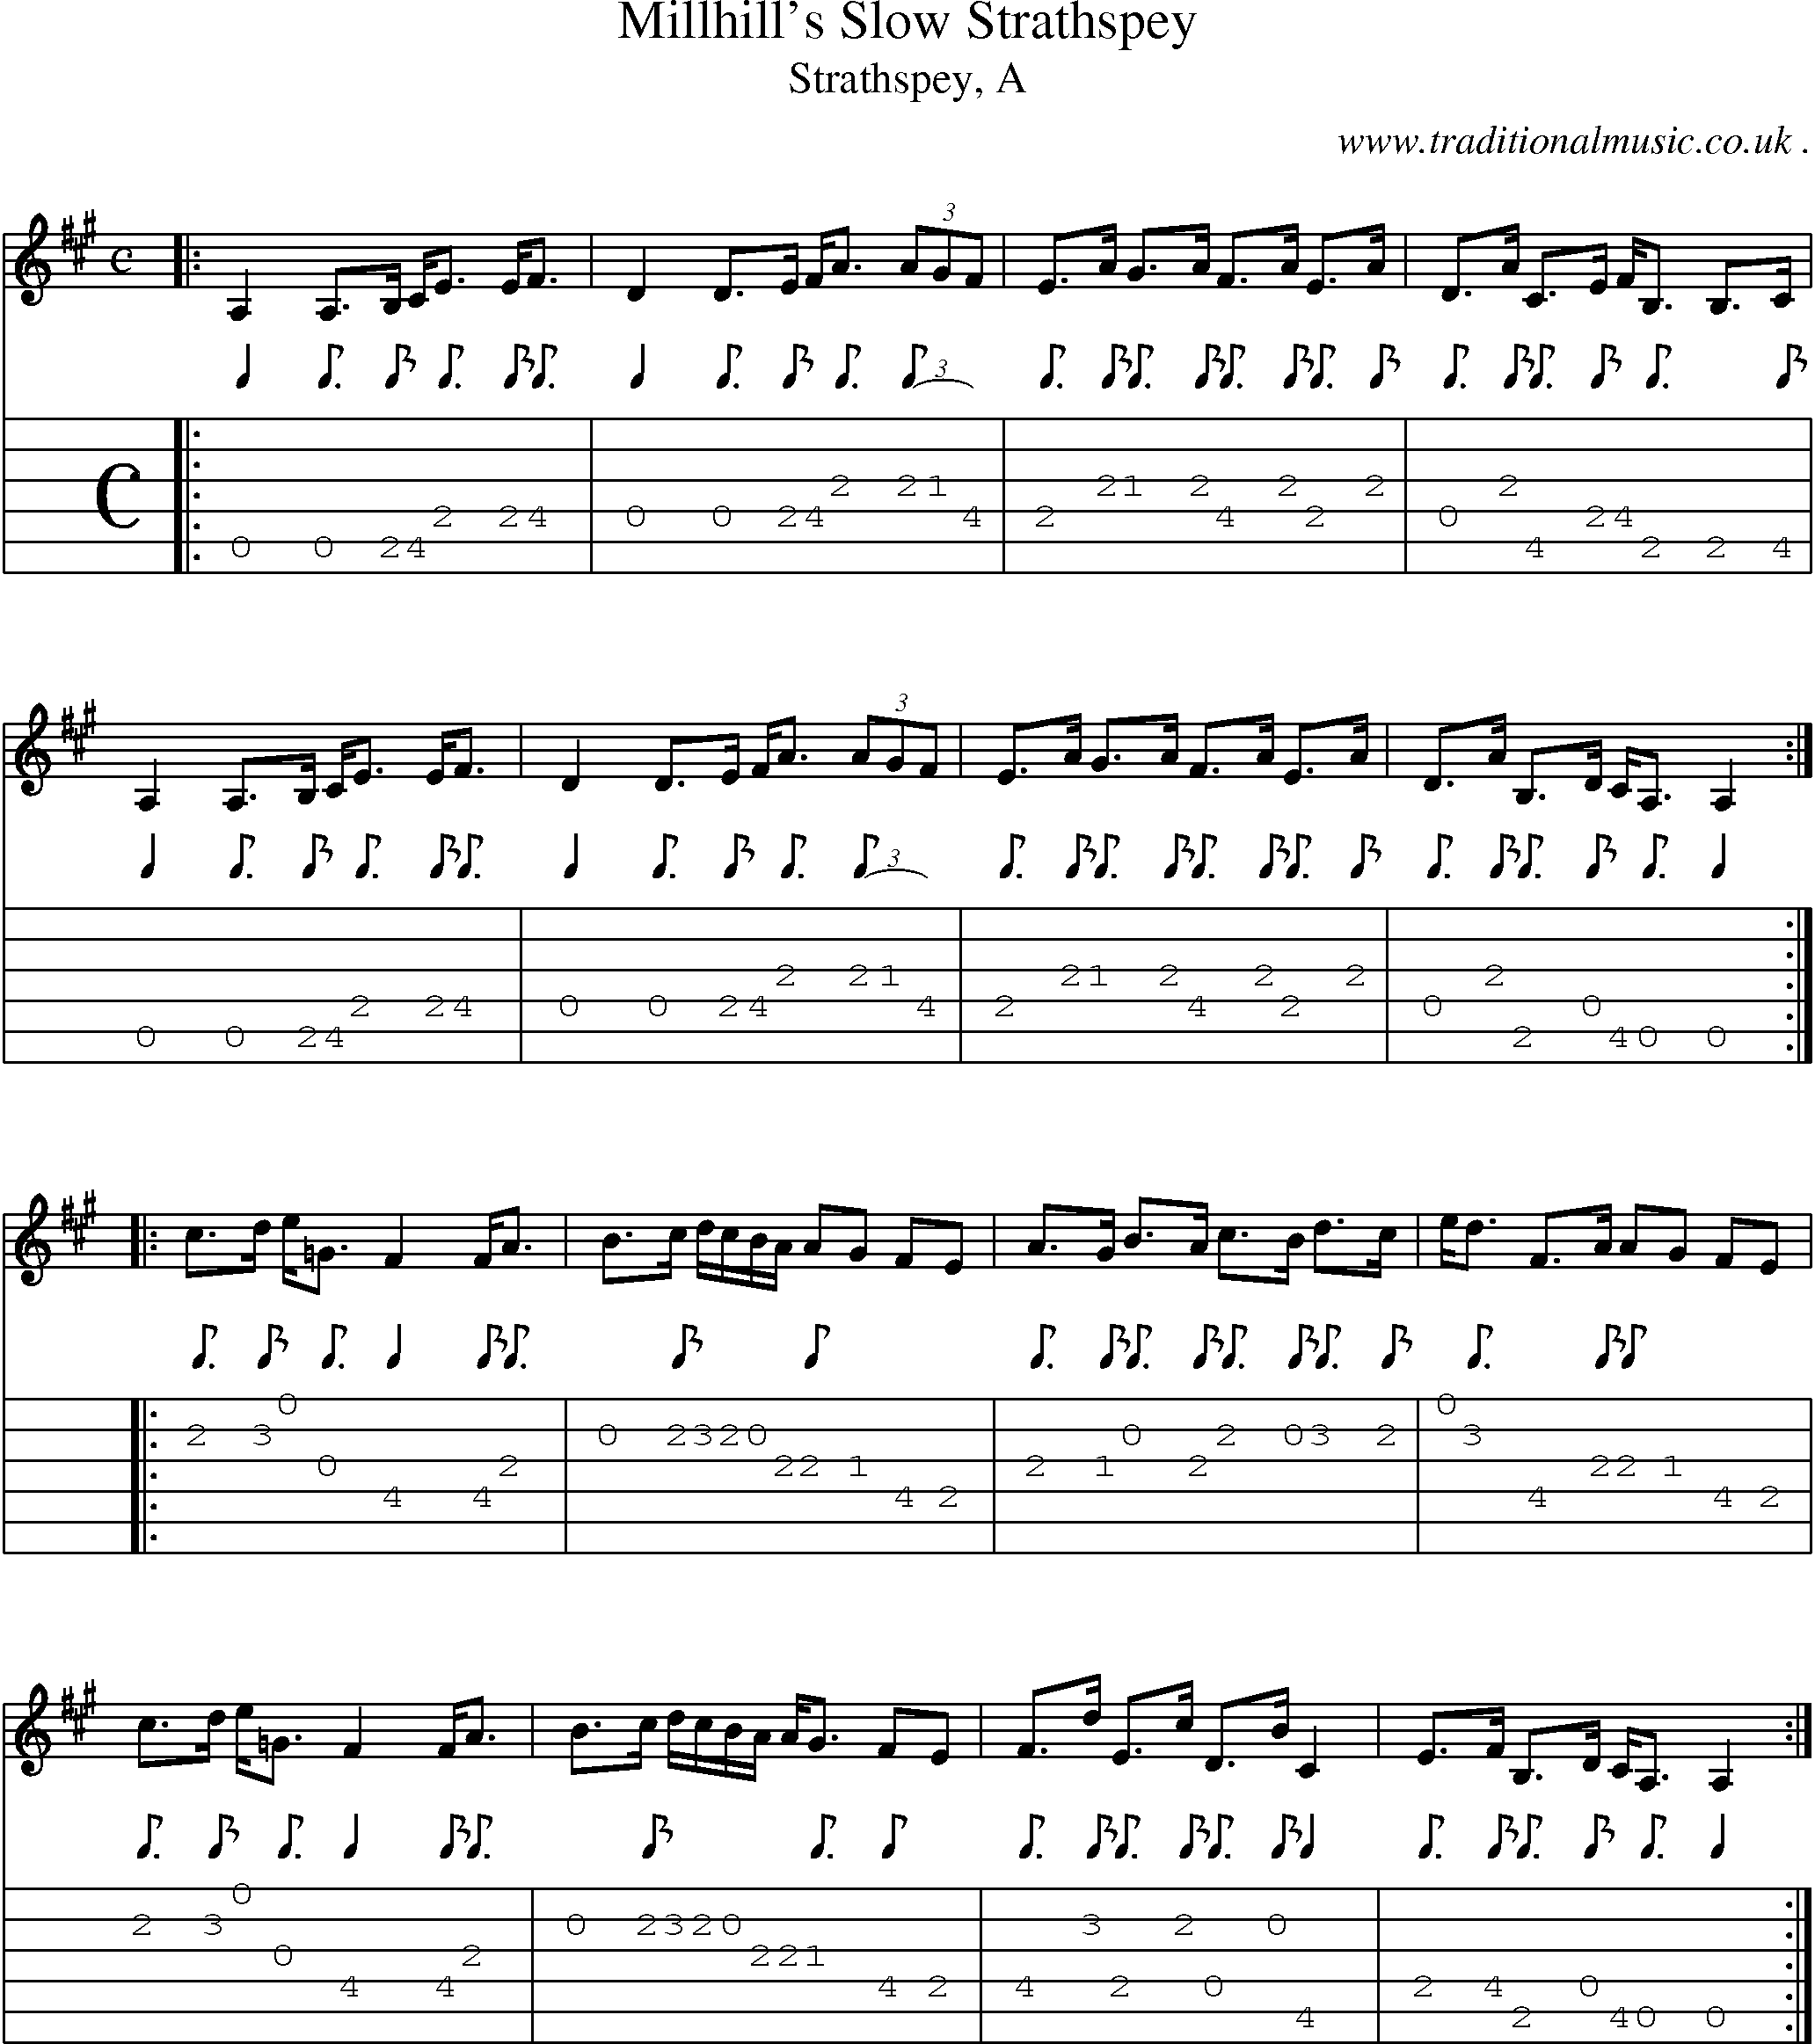 Sheet-music  score, Chords and Guitar Tabs for Millhills Slow Strathspey